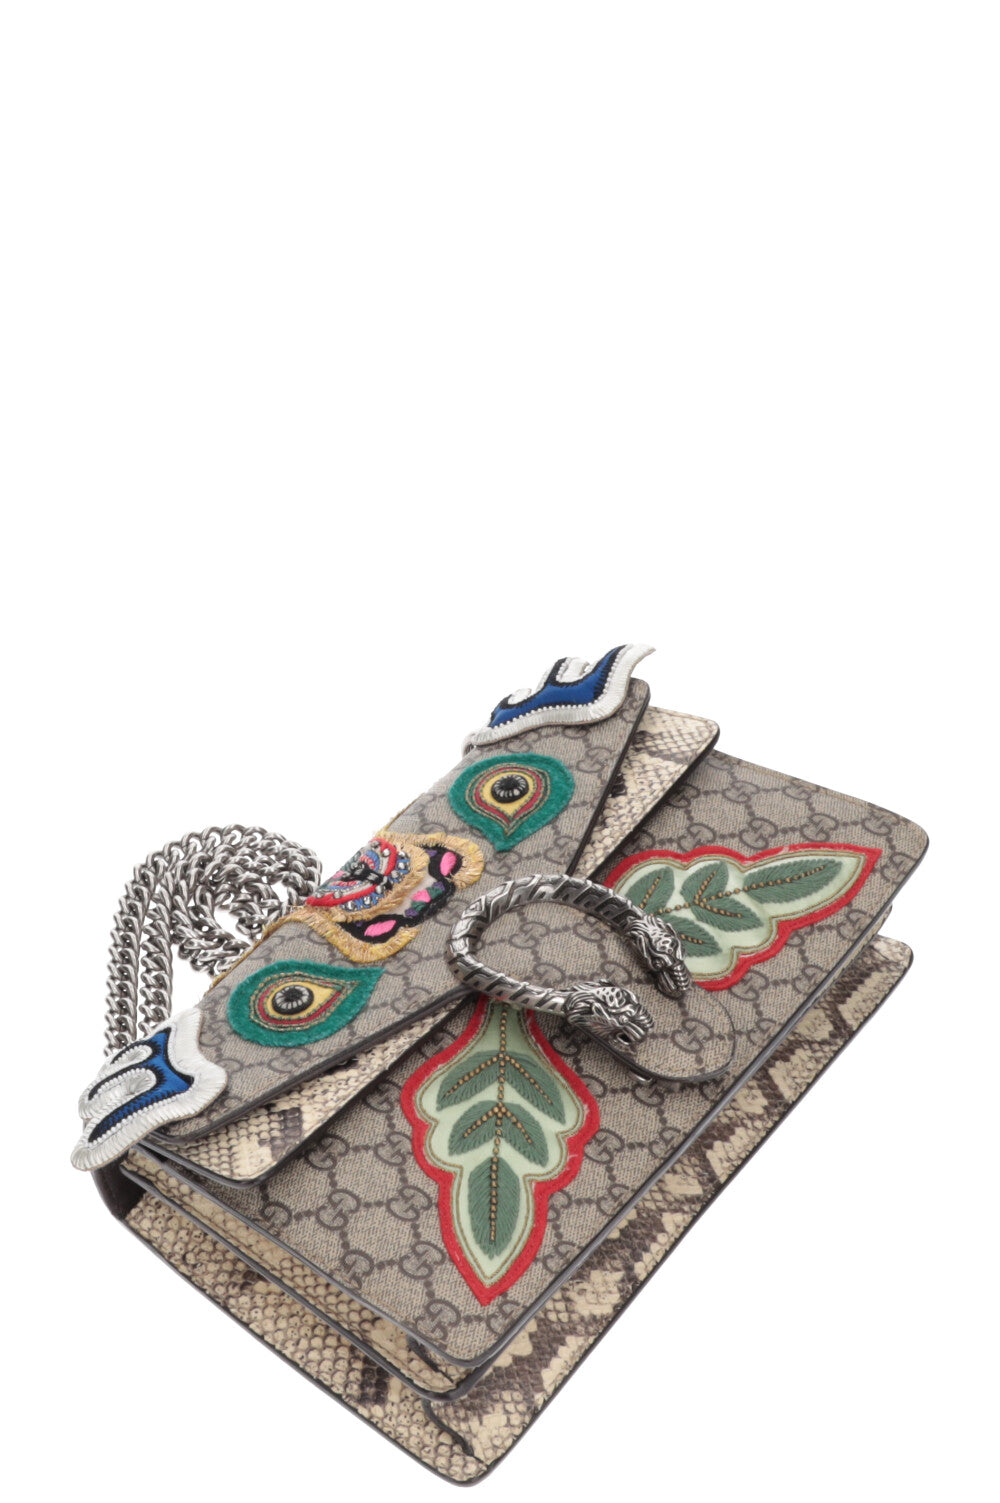 GUCCI Dionysus Small Leaf Embroidery